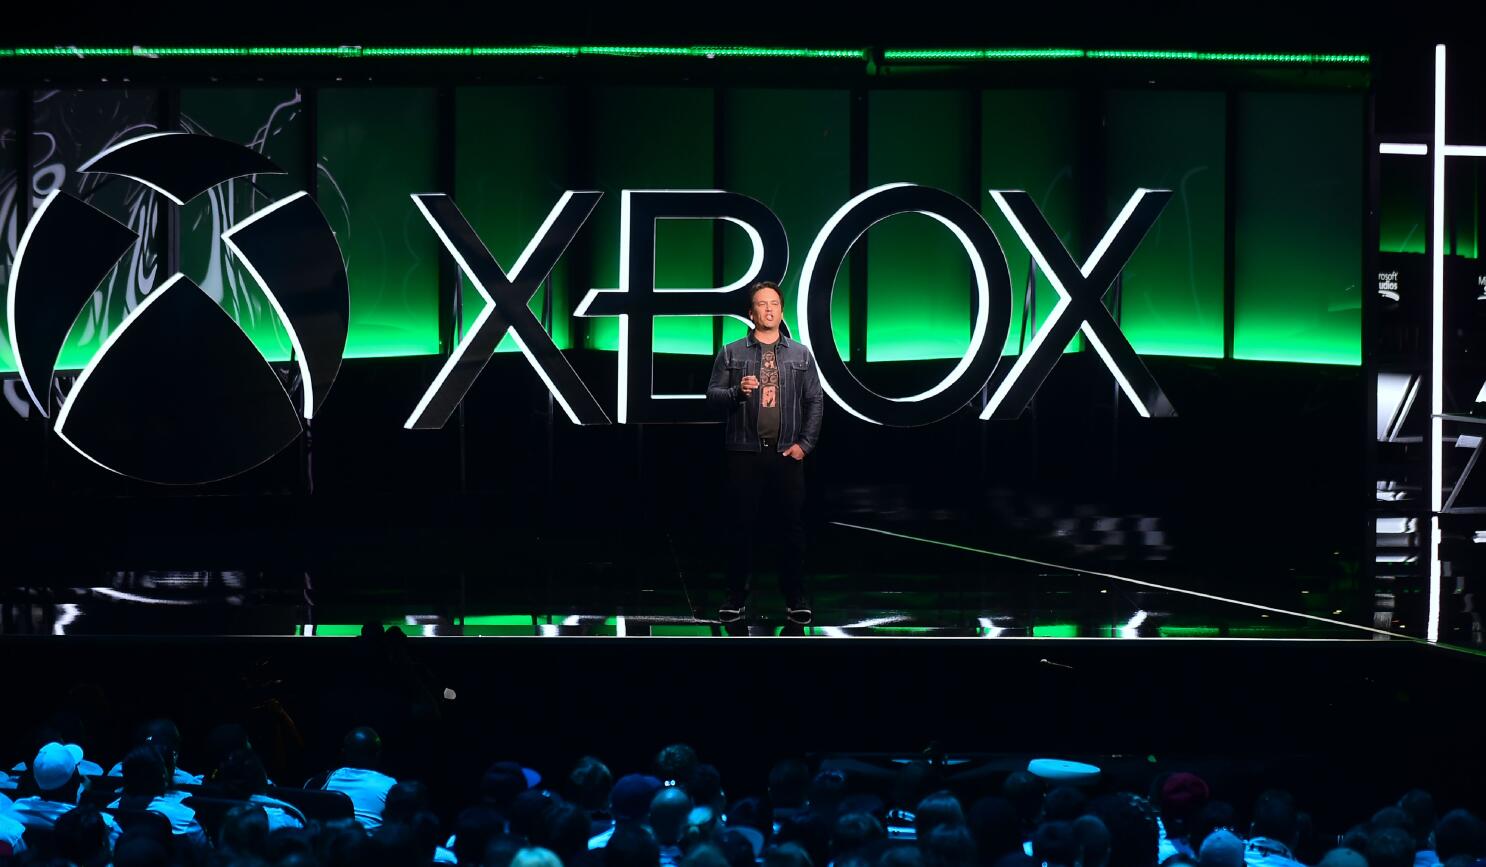 Xbox Game Studios Had a Record Year, Says Microsoft, and They're